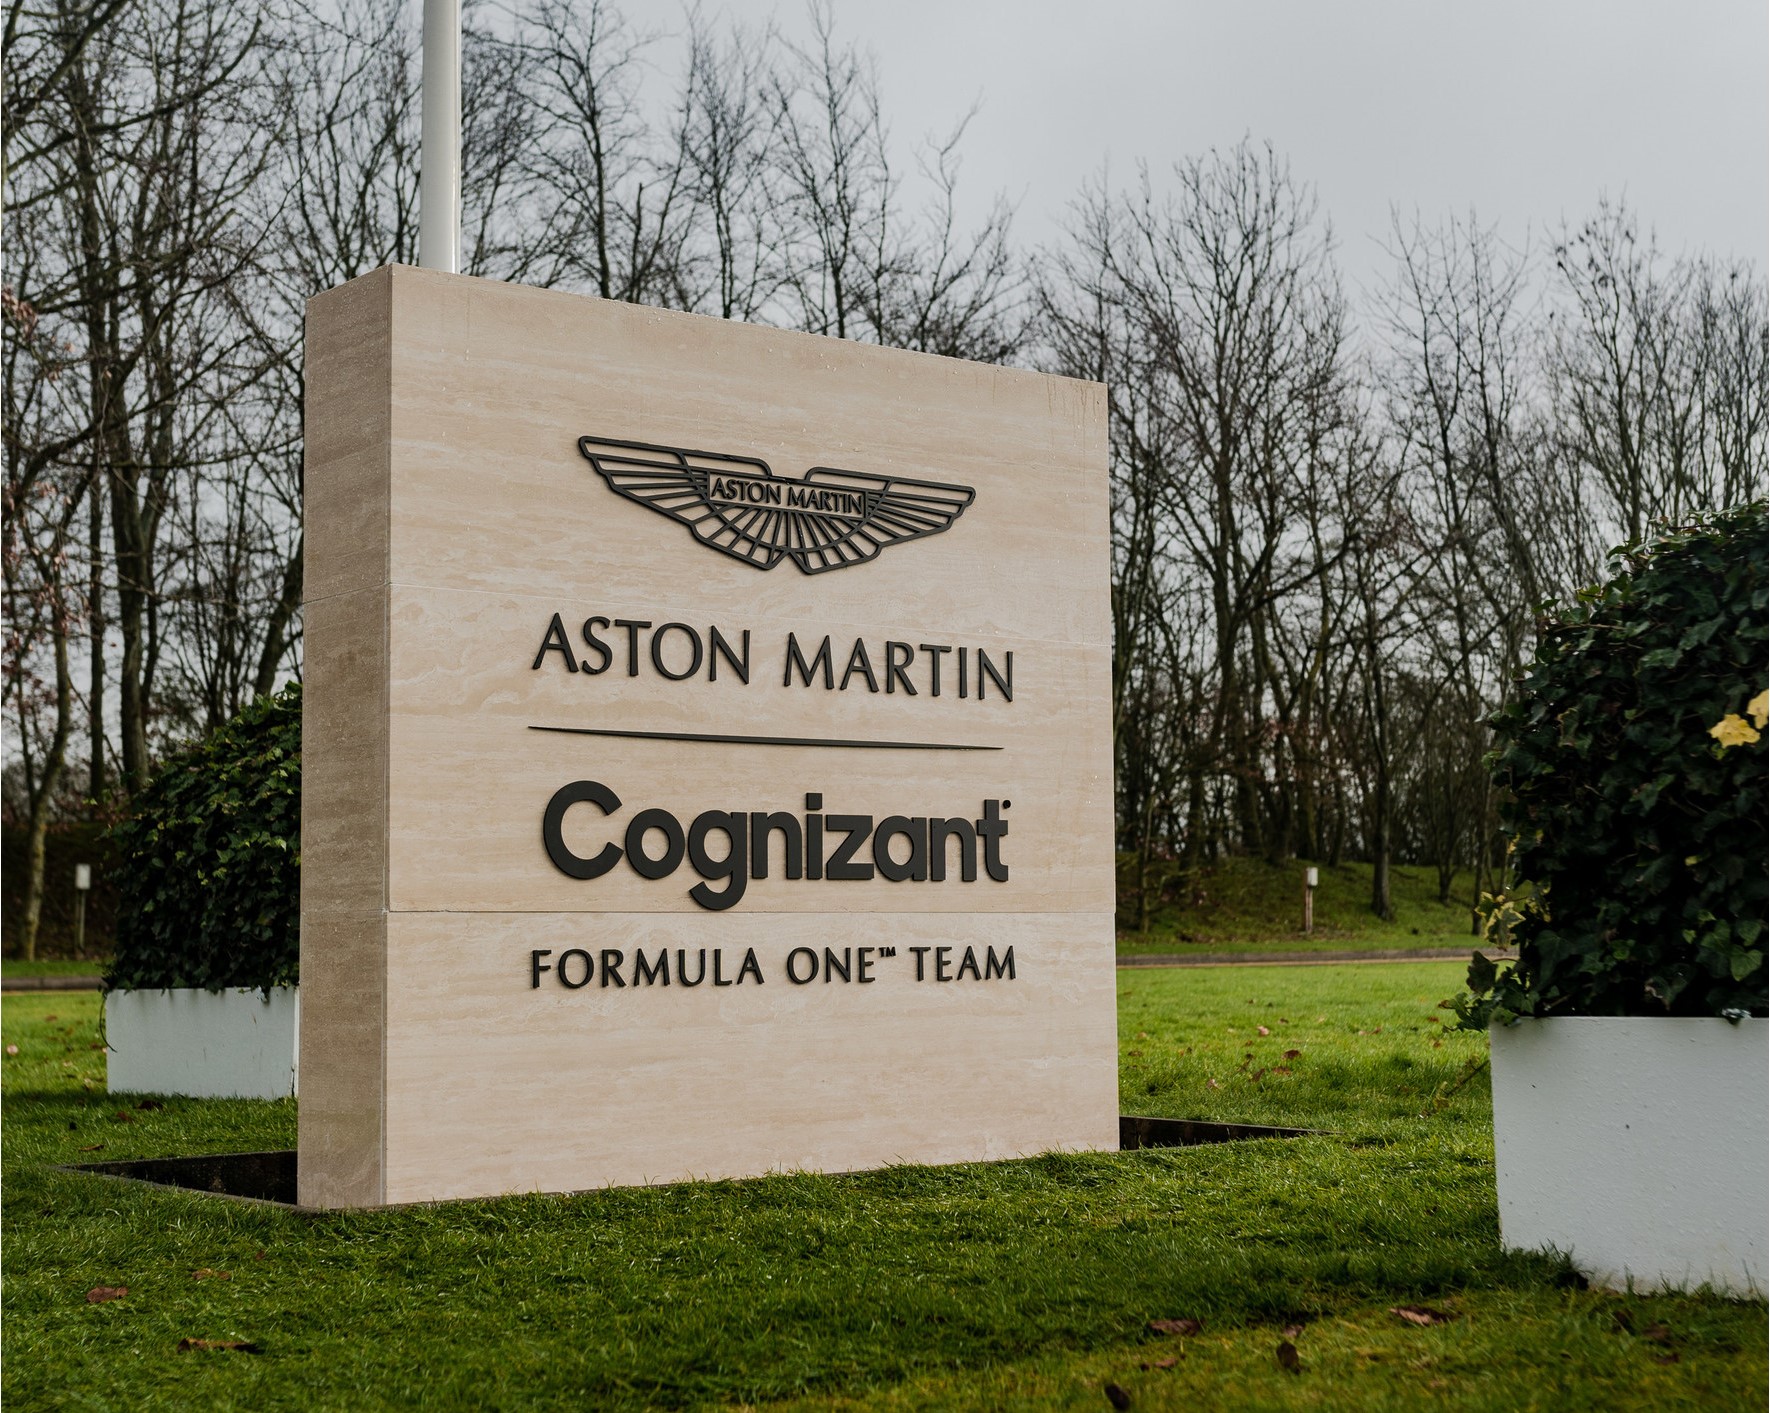 Cognizant to be the official sponsor for the Aston Martin F1 team